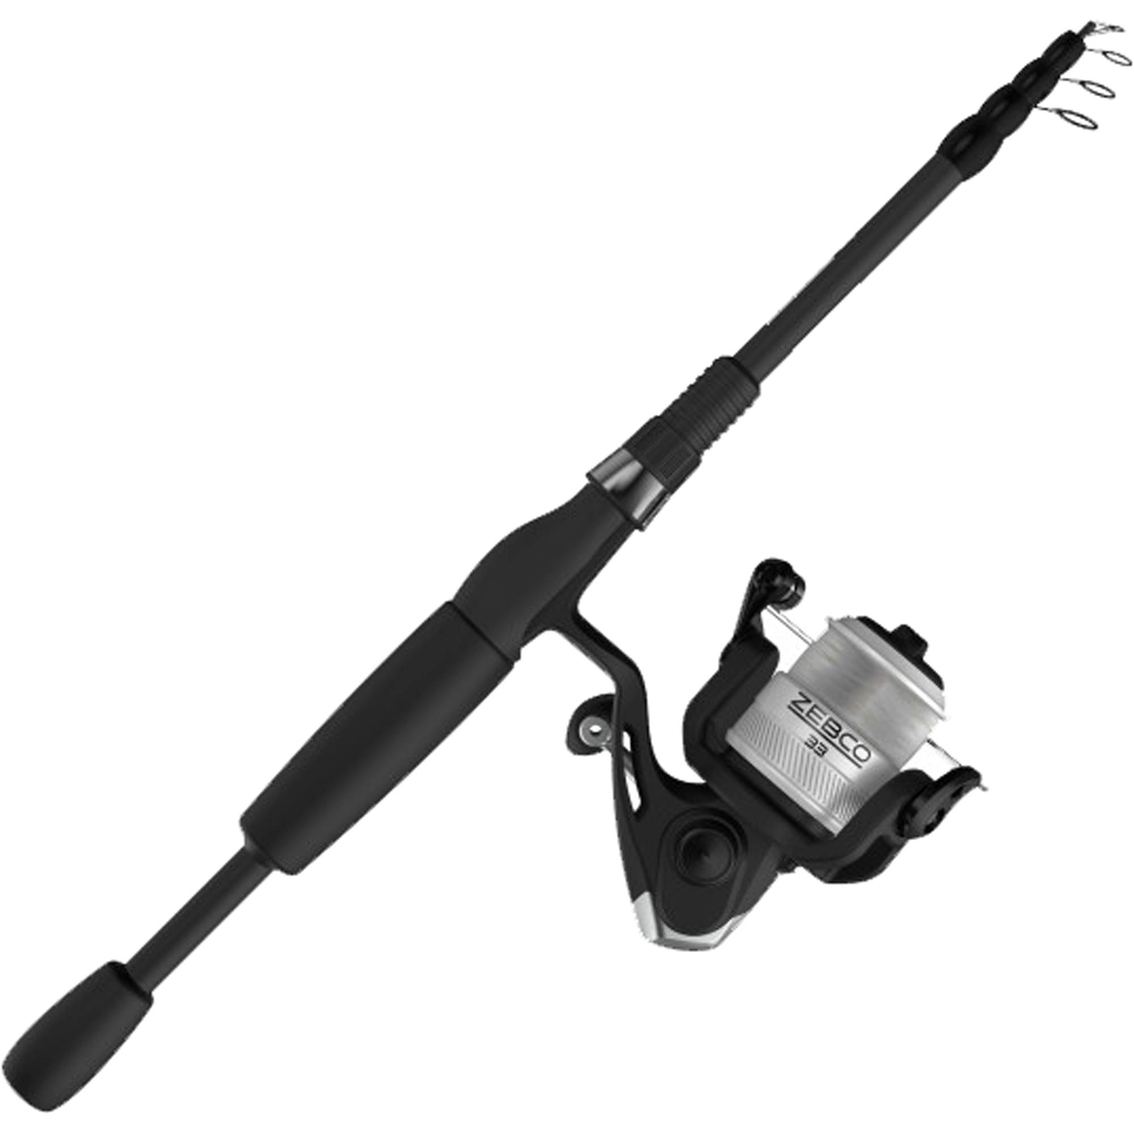 Zebco 33sp Telecast 30sz 6 Ft. Package Combo 8#c Fishing Equipment, Freshwater Rods & Reels, Sports & Outdoors